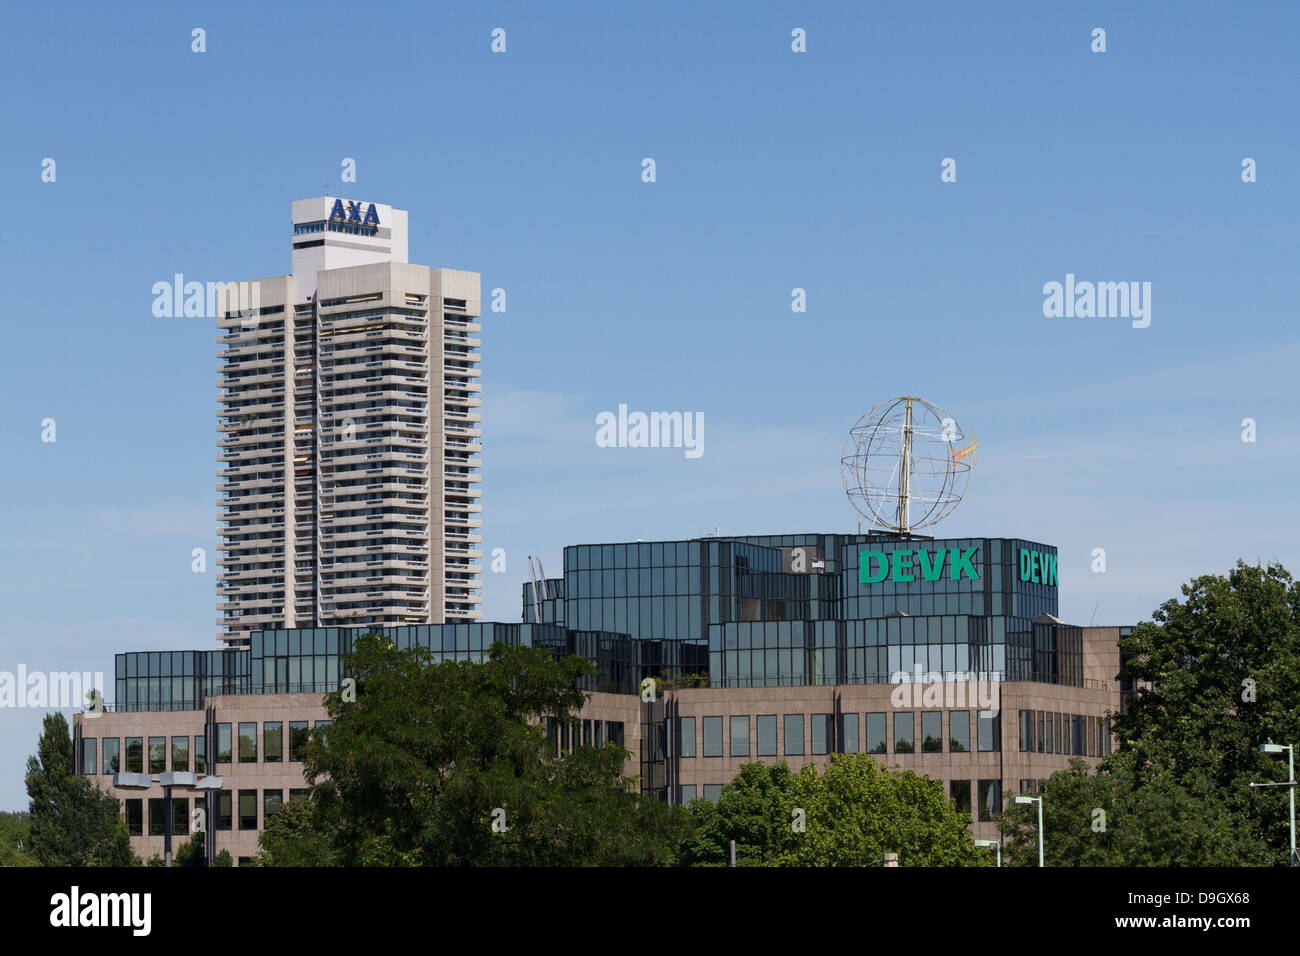 Axa Colonia, Insurance Tower, DEVK Headquarter, Insurance Building, With the Kölner Kugel by Artist HA Schult, Cologne, Germany Stock Photo